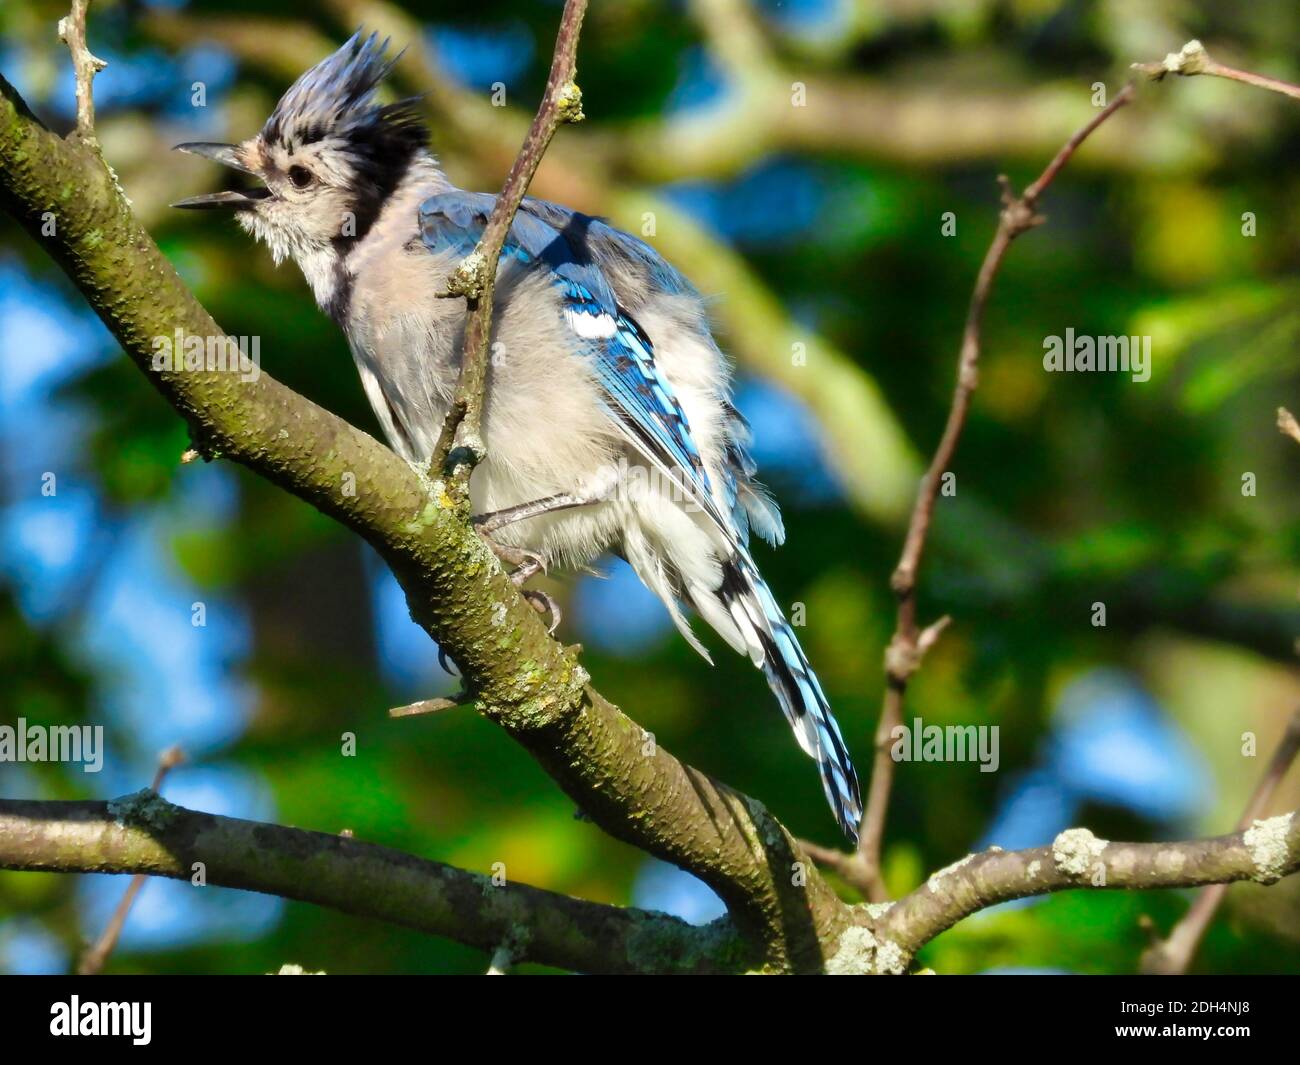 Bluejay Bird Singing with Beak Wide Open and Showing off Blue Feathers in Head Crest and Wings While Perched on Tree Branch with Bright Blue Sky and G Stock Photo